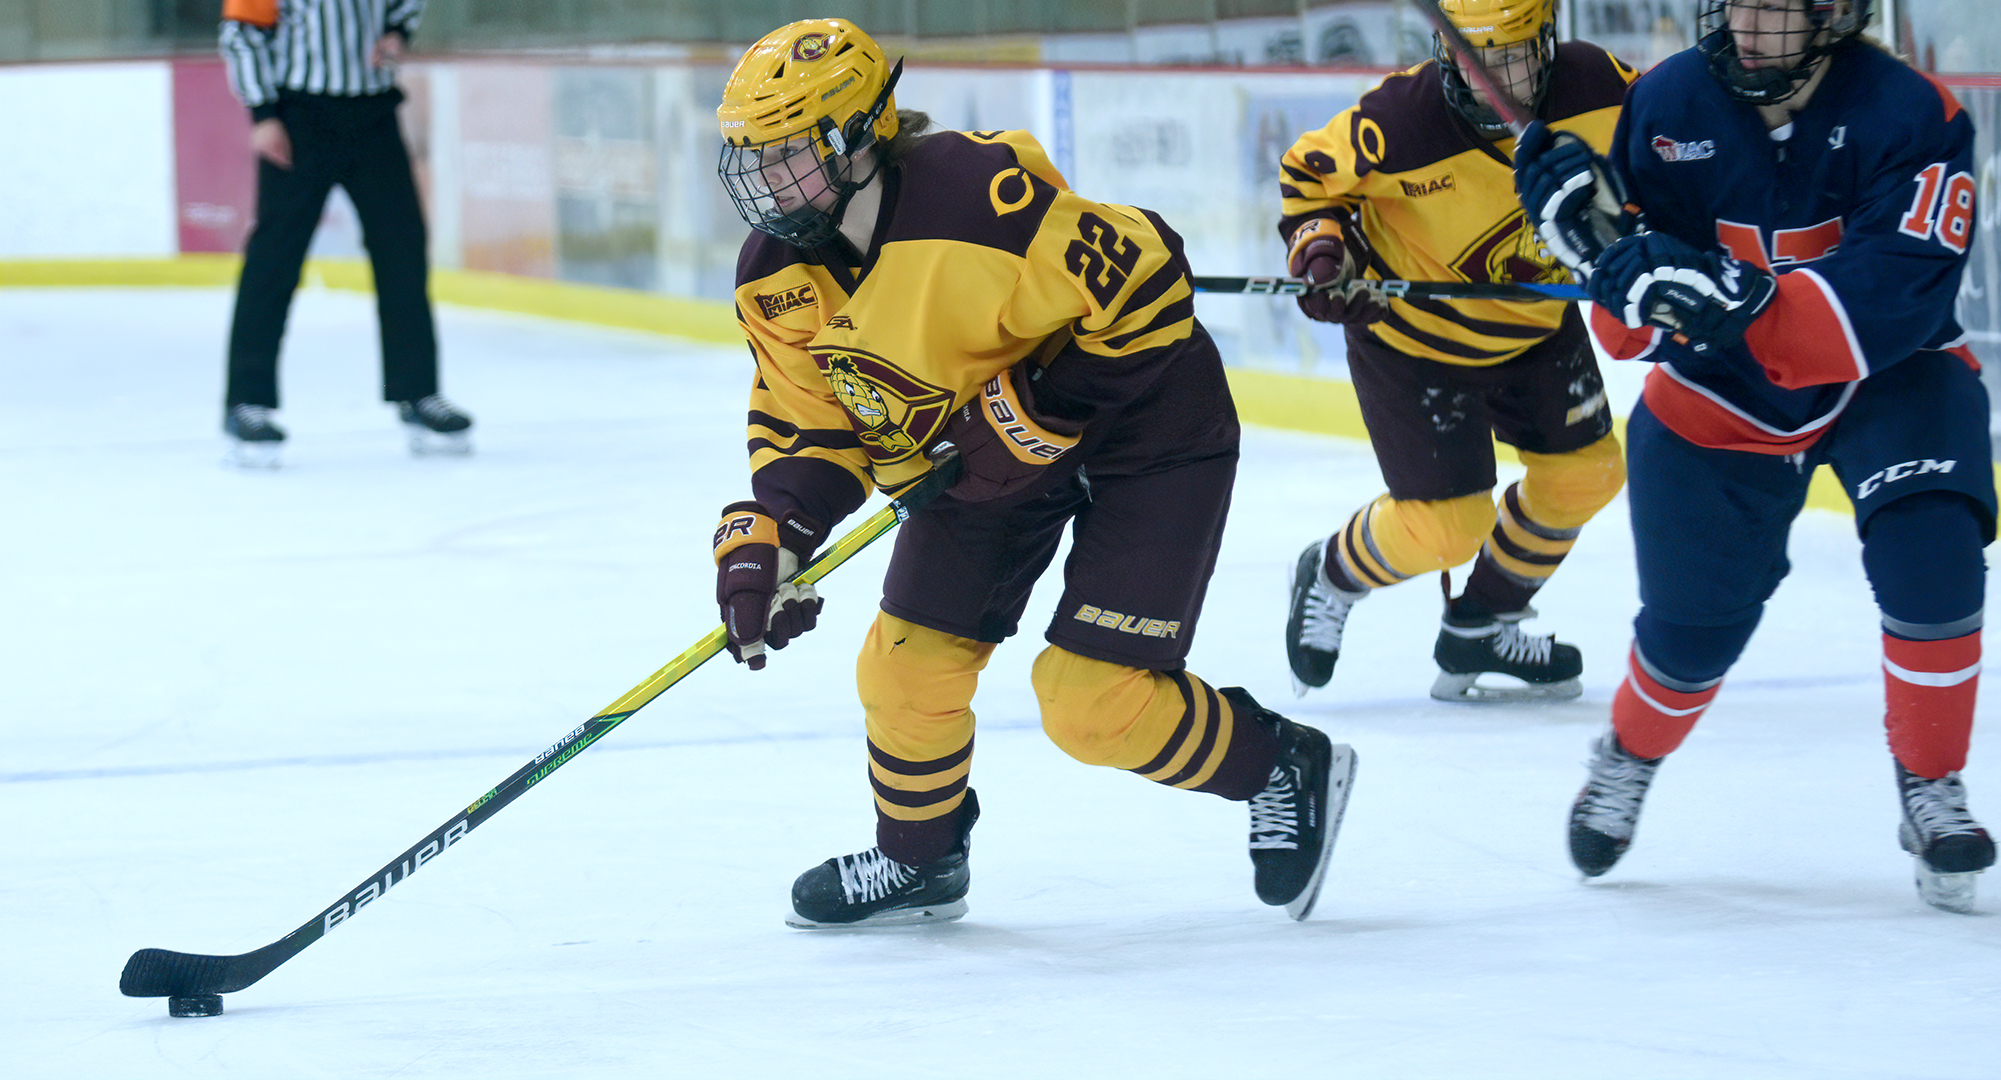 Freshman Morgan Sauvageau had two goals, including her first-ever collegiate score, and helped the Cobbers beat Finlandia 8-0 in the series opener.